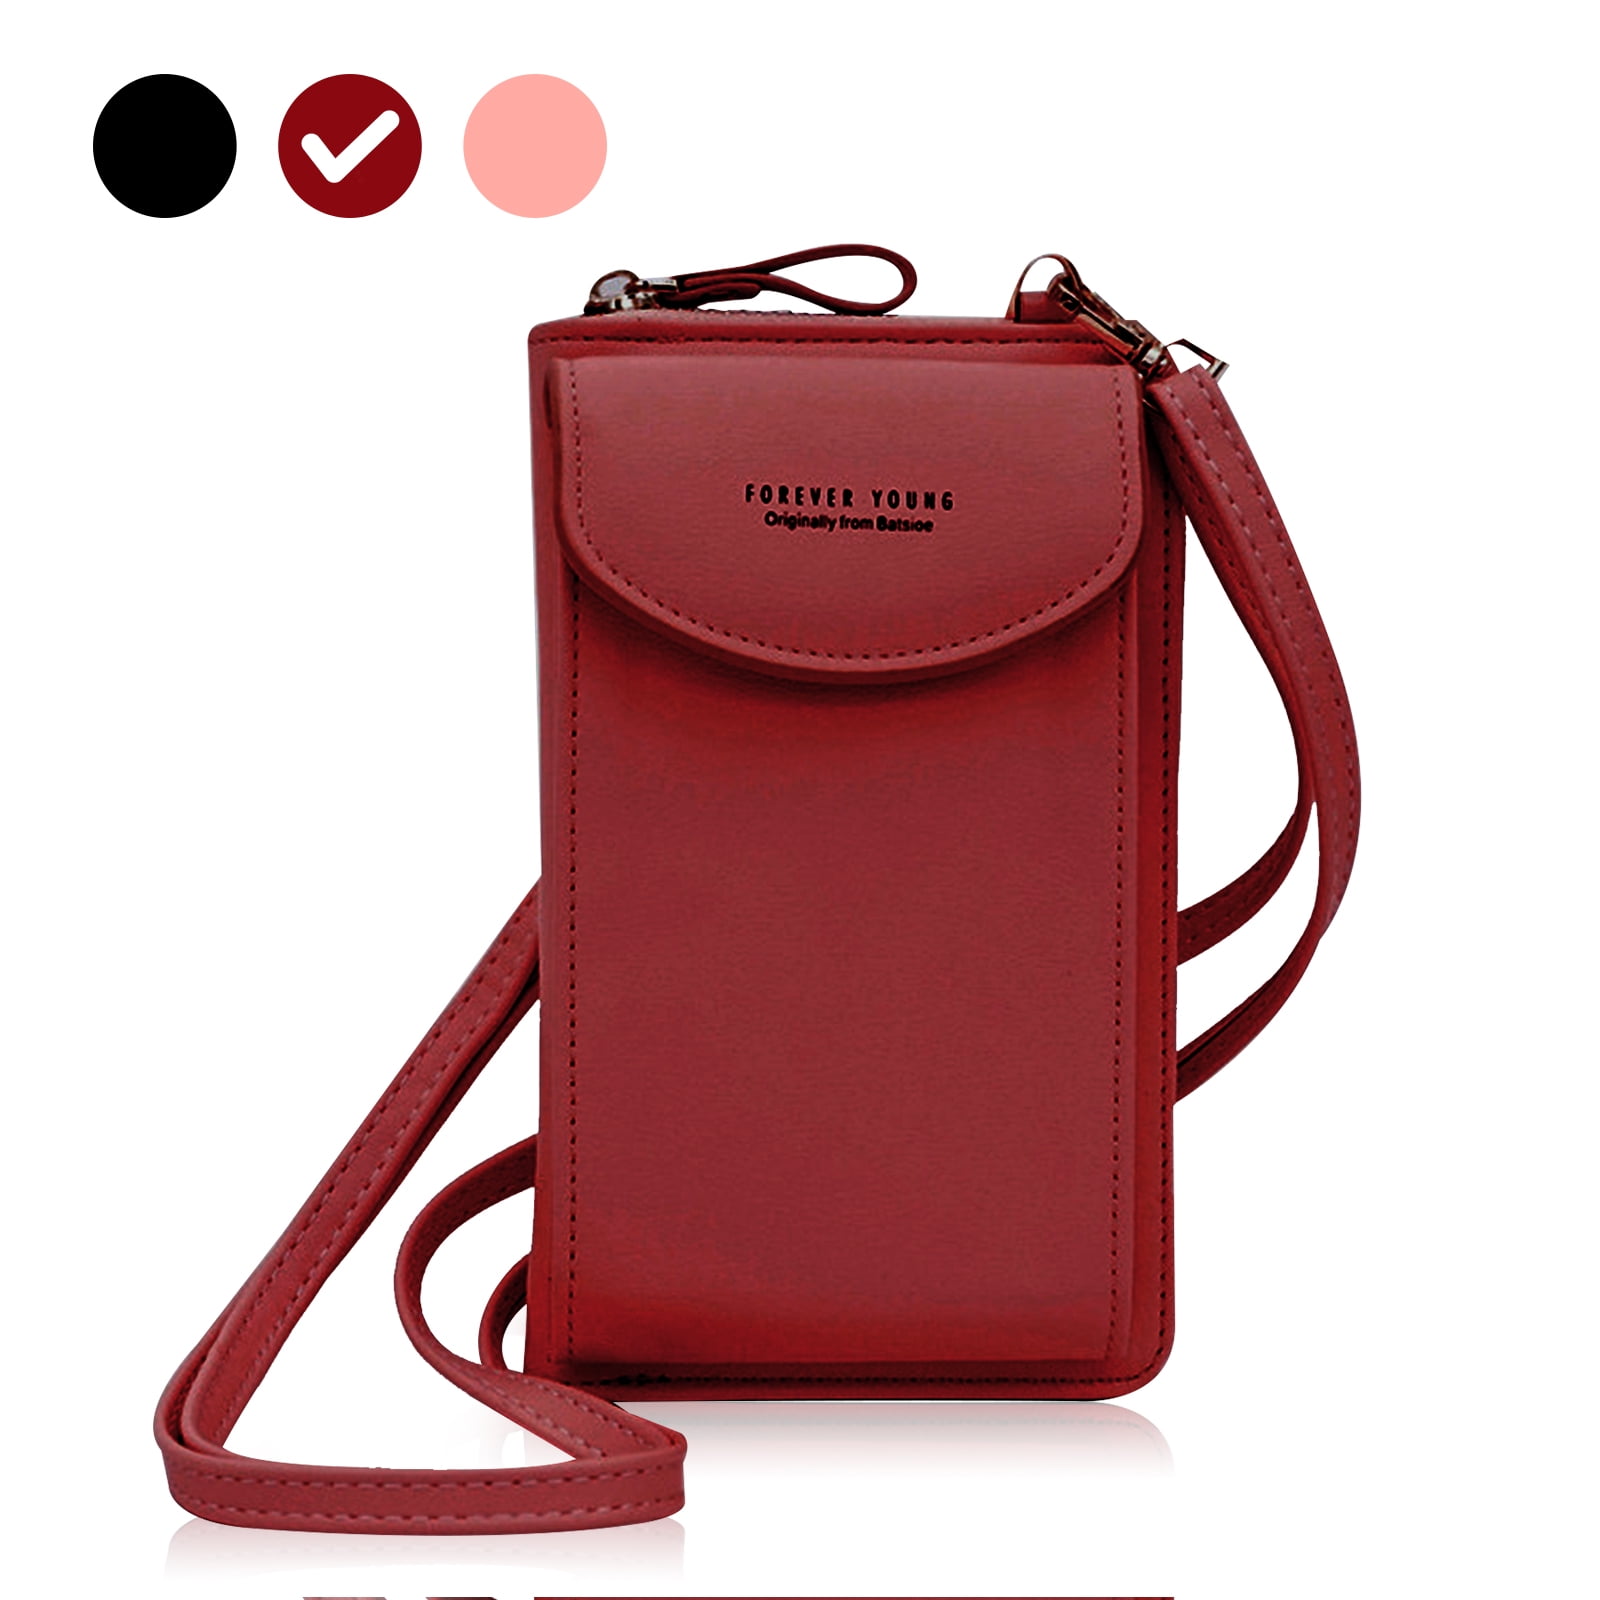 PU Leather Wallet Crossbody Cell Phone Bag Pouch for Women Chic Handbag S 